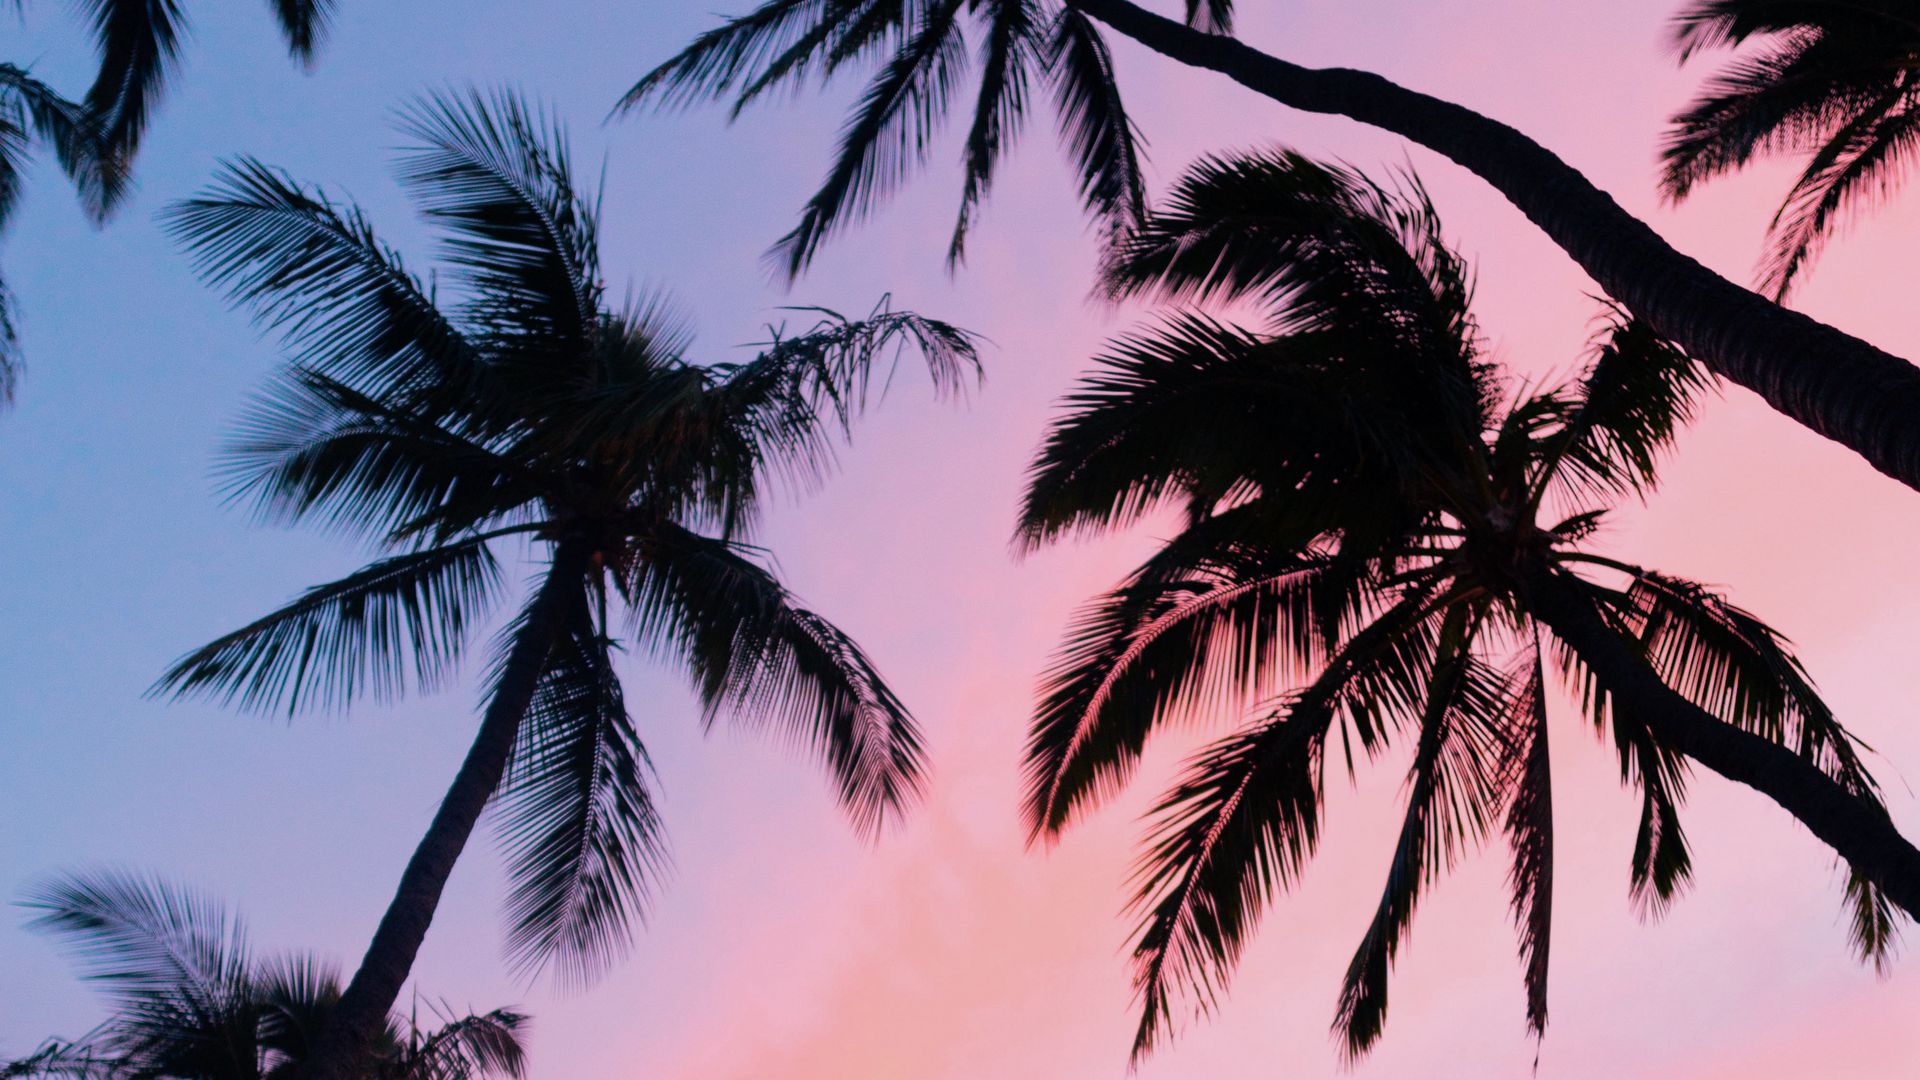 Pink palms  Tree wallpaper iphone Palm trees wallpaper Tree wallpaper